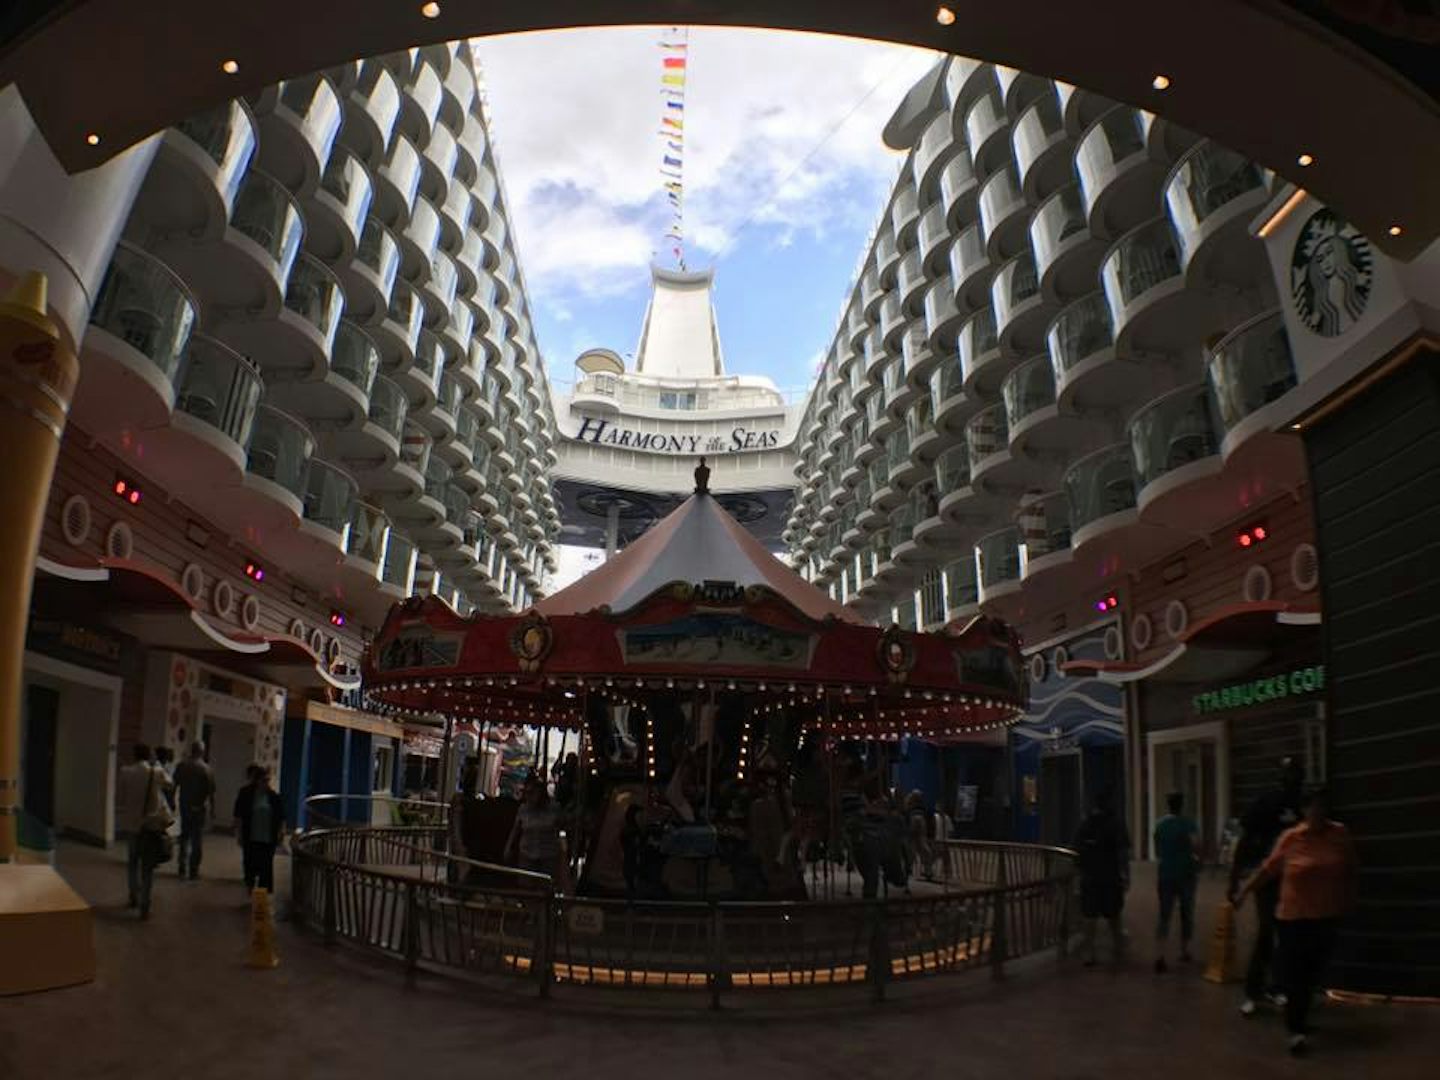 Back of the Harmony of the Seas Carnival